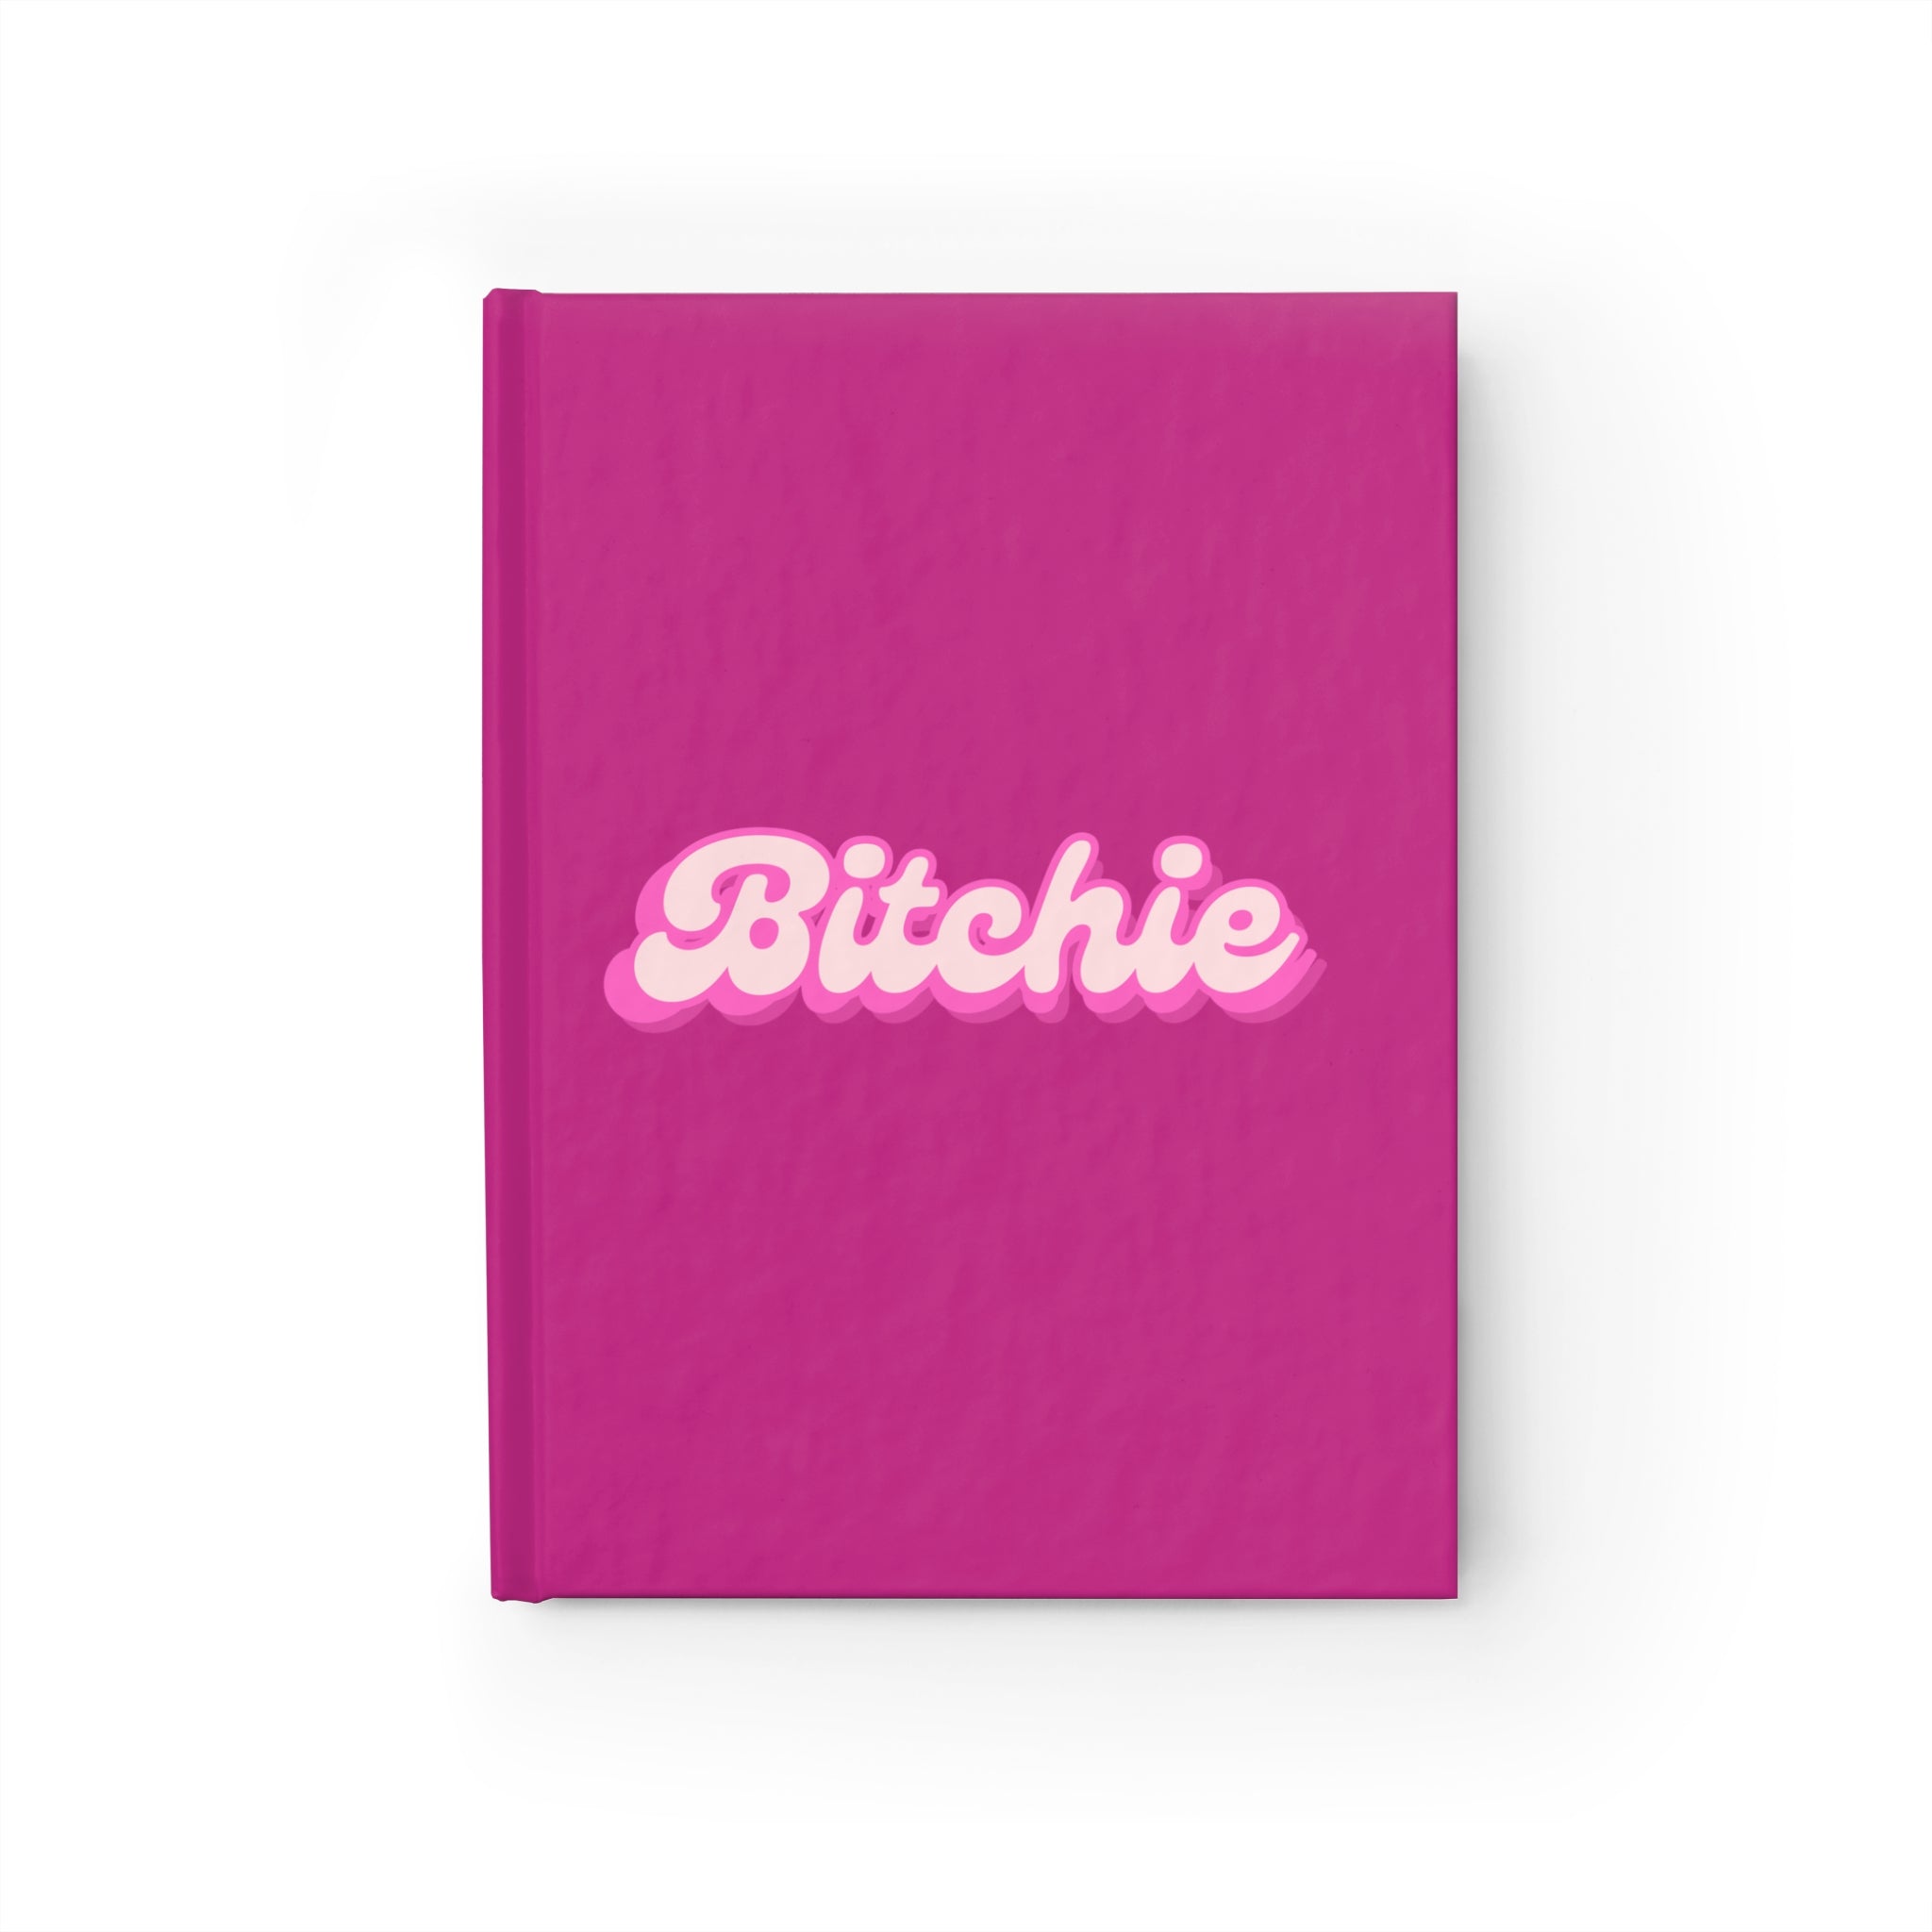  Bright Pink "Bitchie" Journal - Ruled Line, Lined Notebook, Gratitude Journal Paper productsJournal